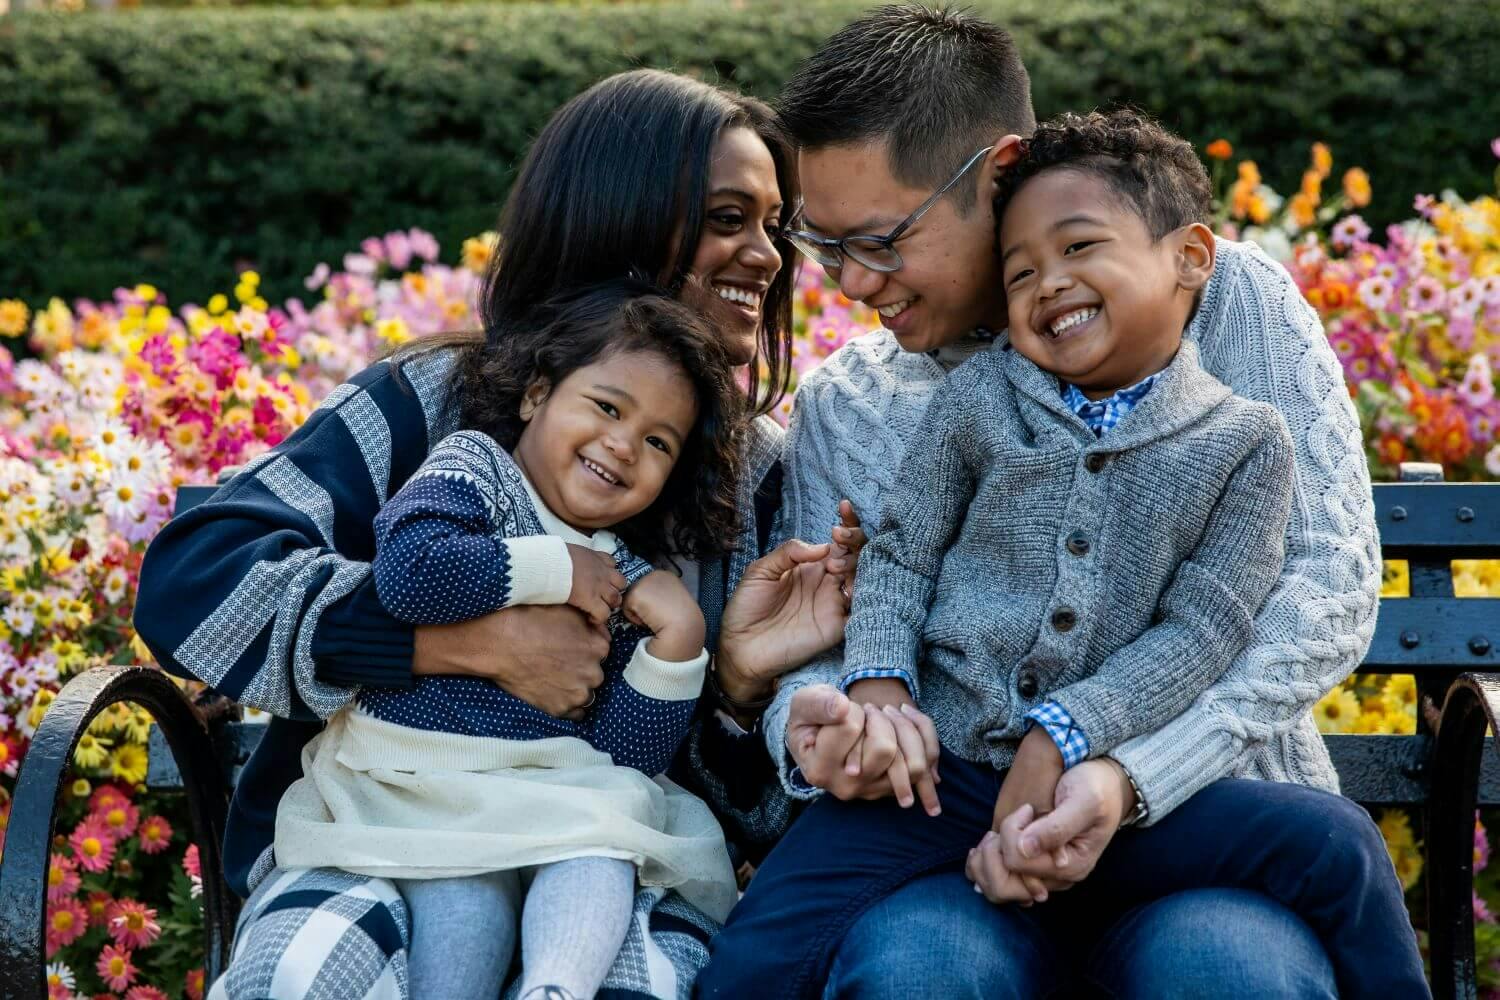 A happy family with two children smiling and hugging each other on a park bench surrounded by flowers.